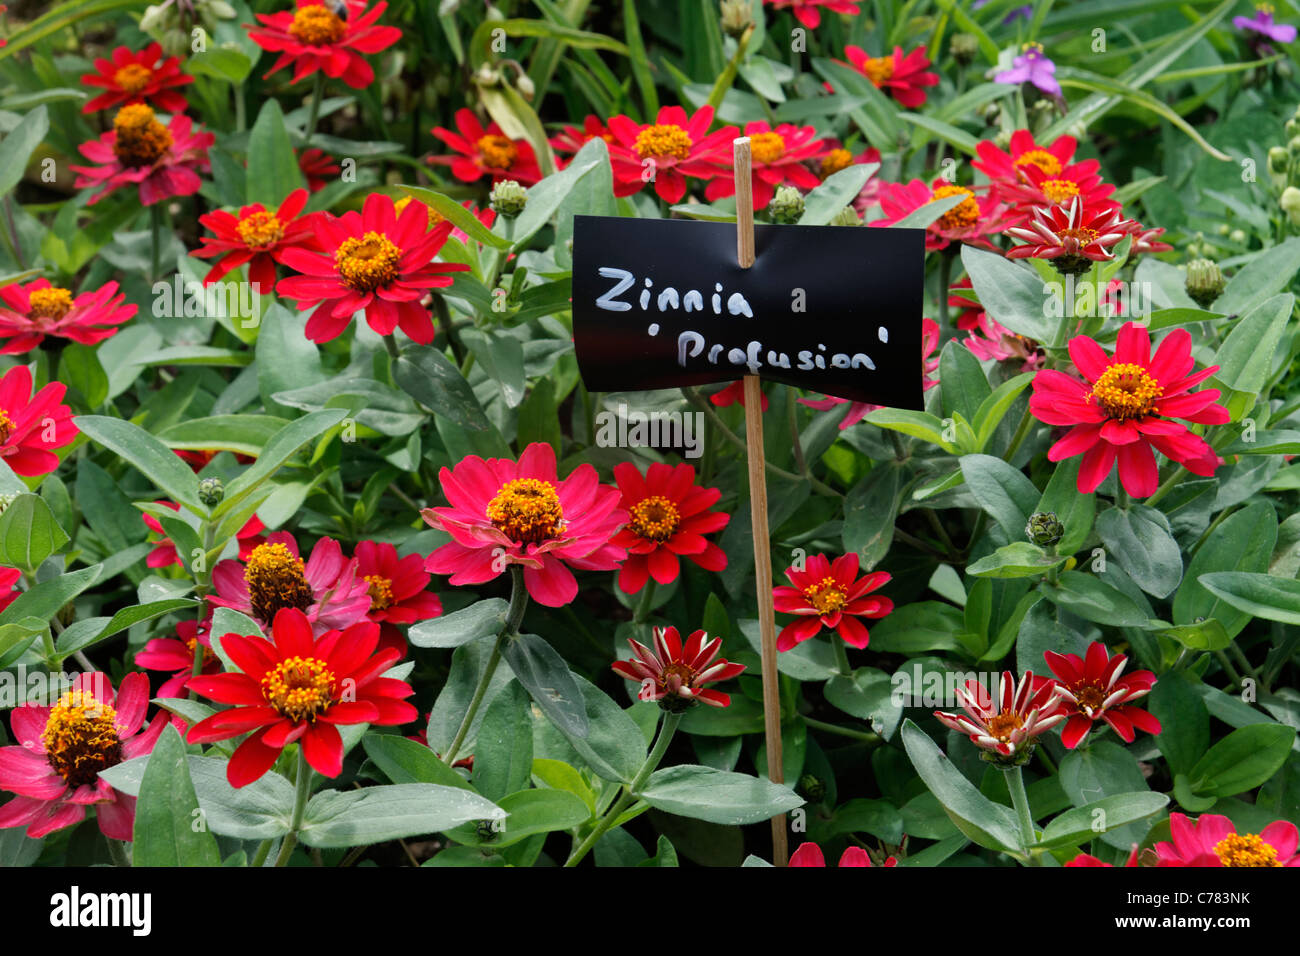 Zinnia (Variety : Profusion), label with the name of the flower Stock Photo